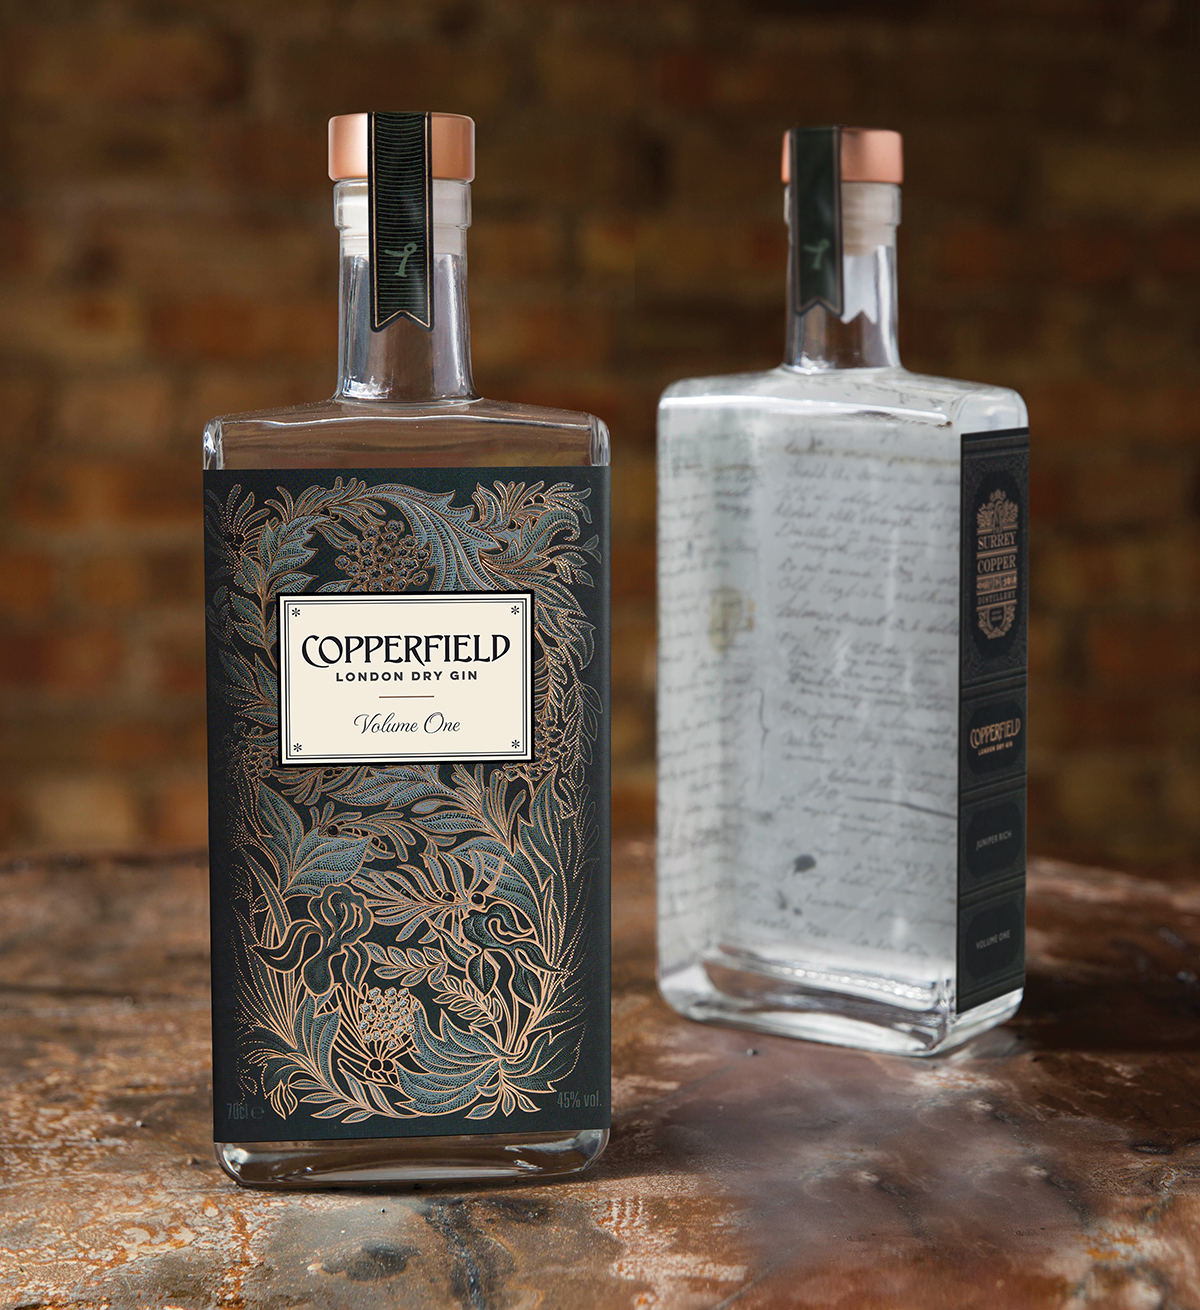 Launch and Design of Copperfield London Dry Gin from The Surrey Copper Distillery